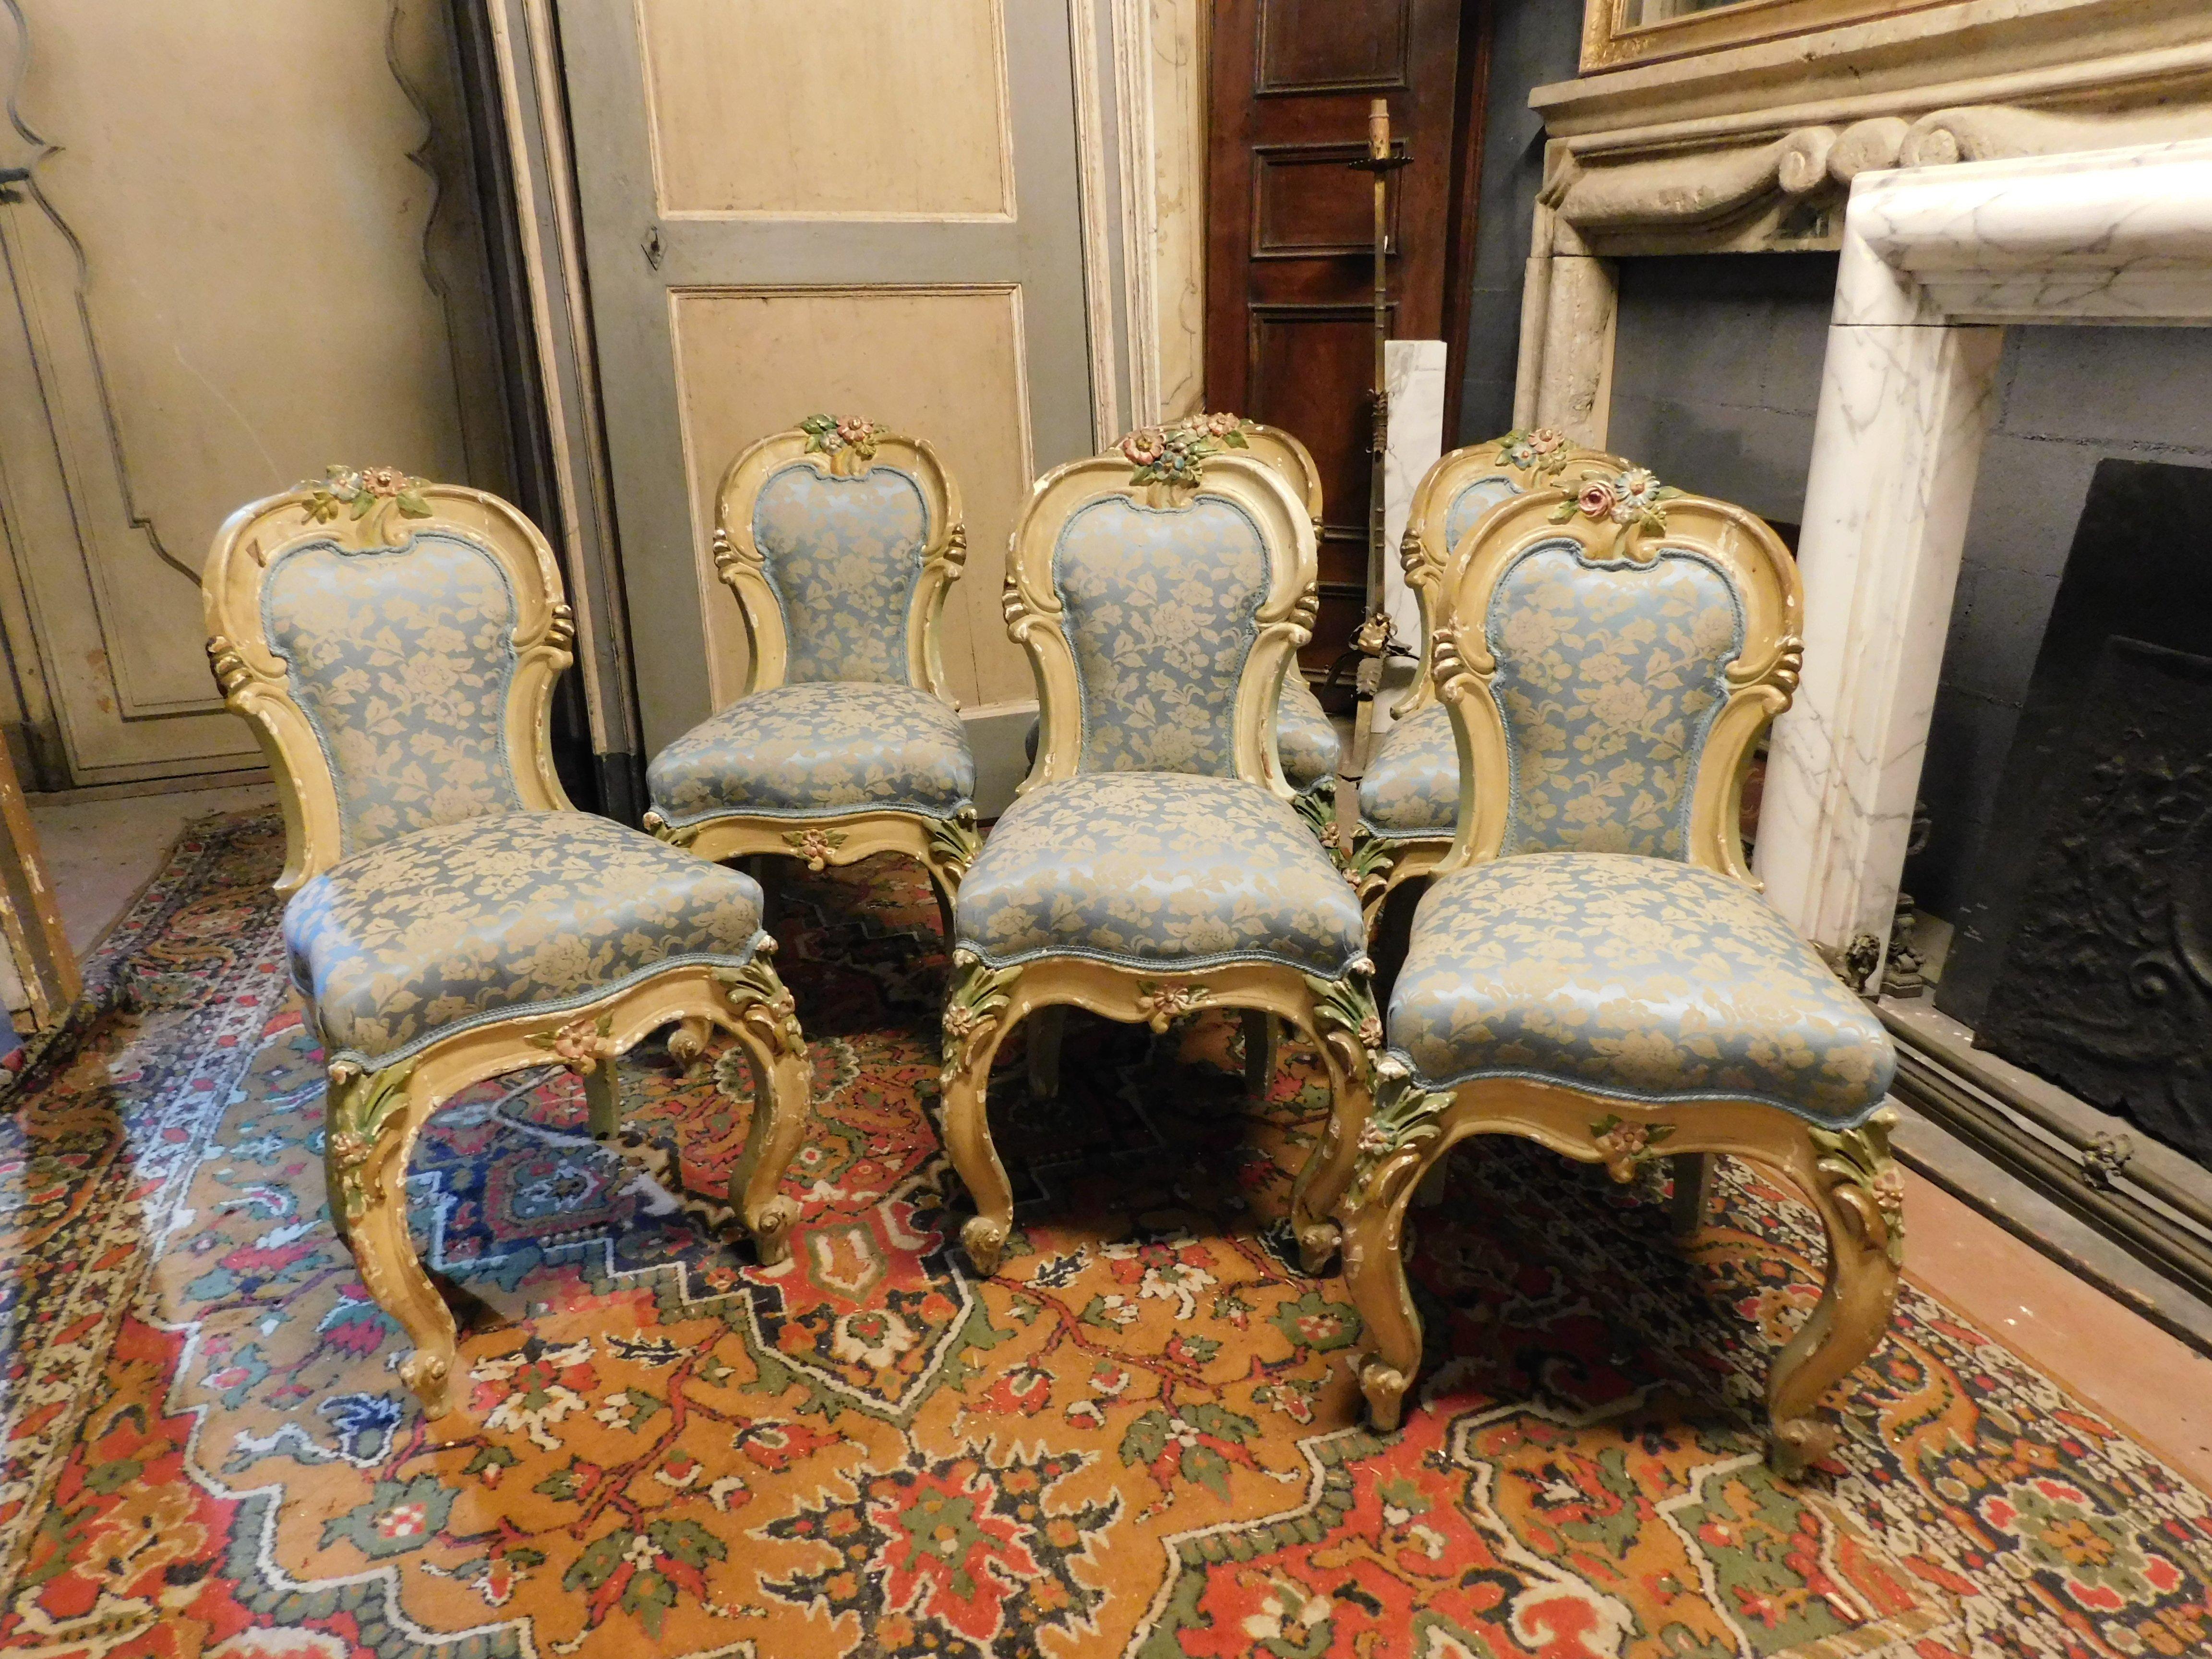 Complete old vintage Liberty living room set: 6 chairs, 2 armchairs, 1 sofa, 1 console with mirror and 2 shelves, all richly carved with period floral motifs and precious original brocade fabric, made in Italy in the middle of the 1900s. Lots of